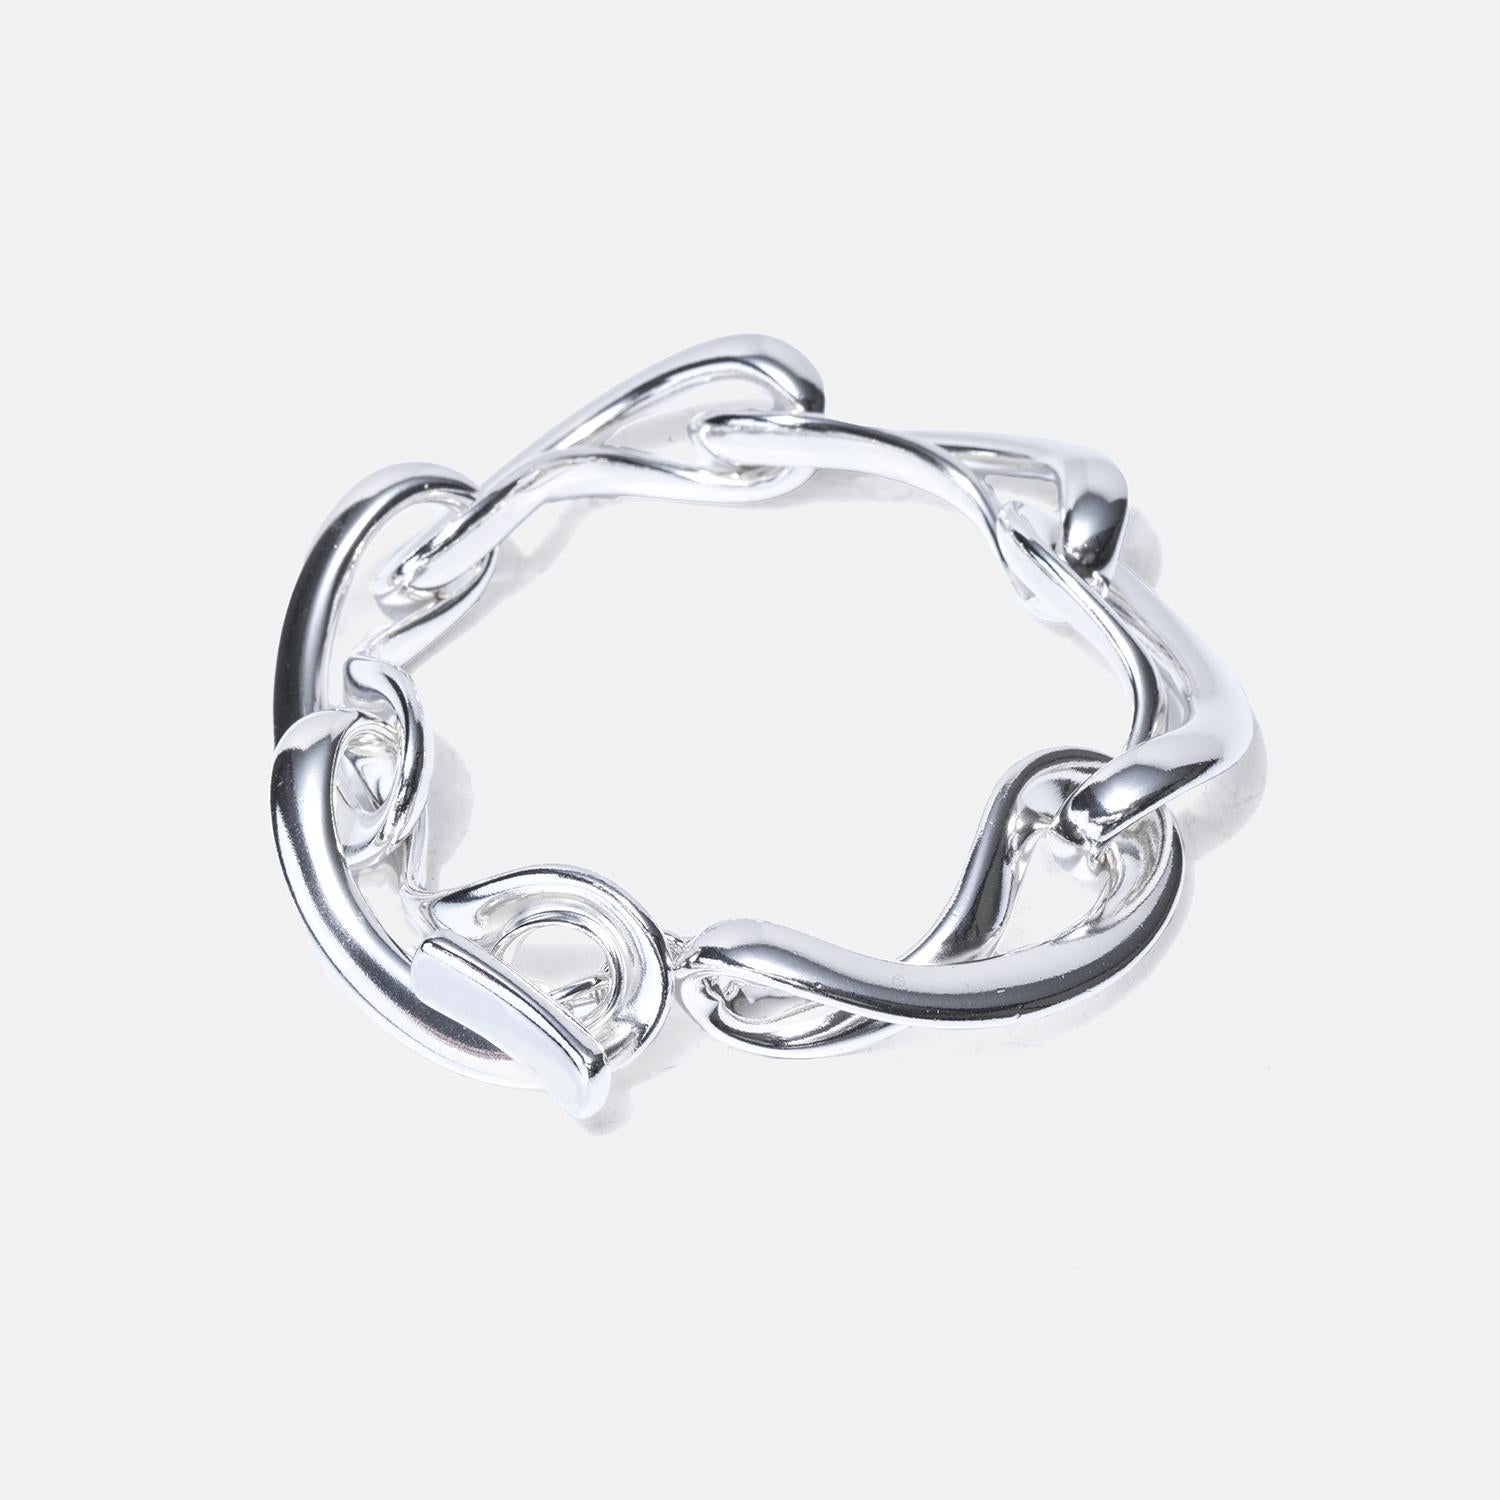 This sterling silver bracelet, part of the Infinity collection, features organically shaped links that intertwine fluidly, creating a dynamic and elegant appearance. Each link is consistently shaped and sized, contributing to the bracelet's